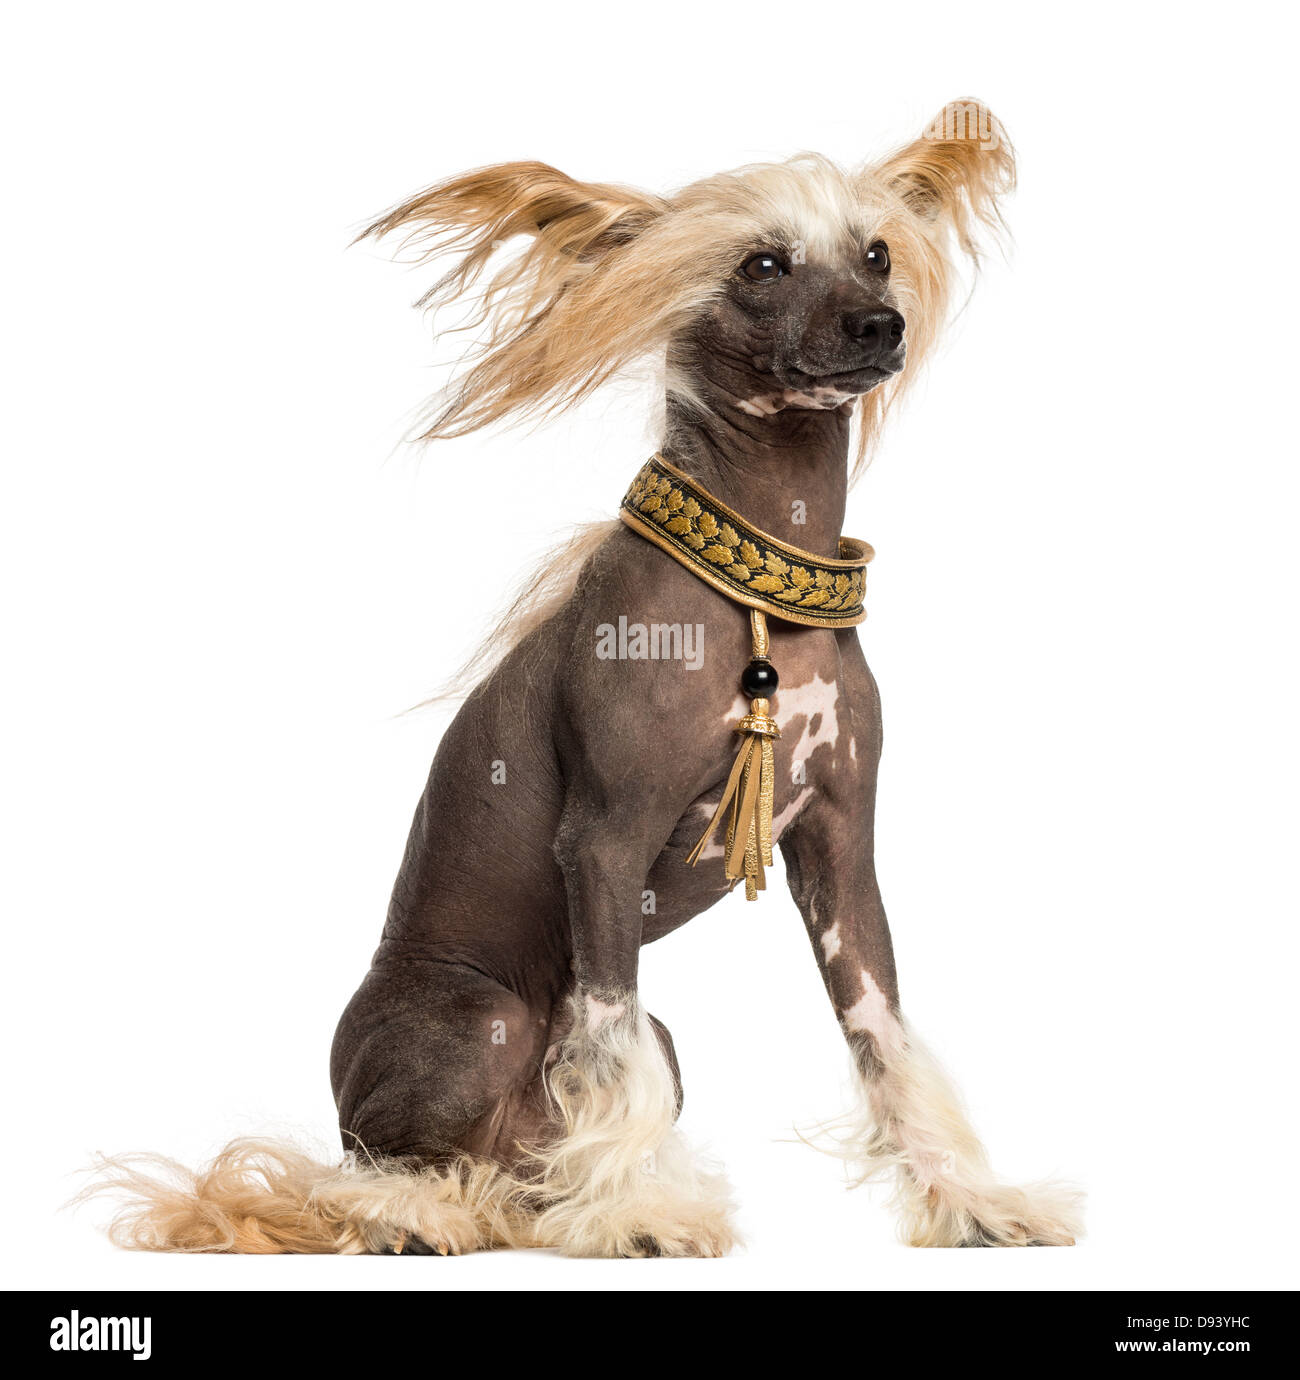 Chinese Crested Dog, 3 years old, sitting and windswept against white background Stock Photo